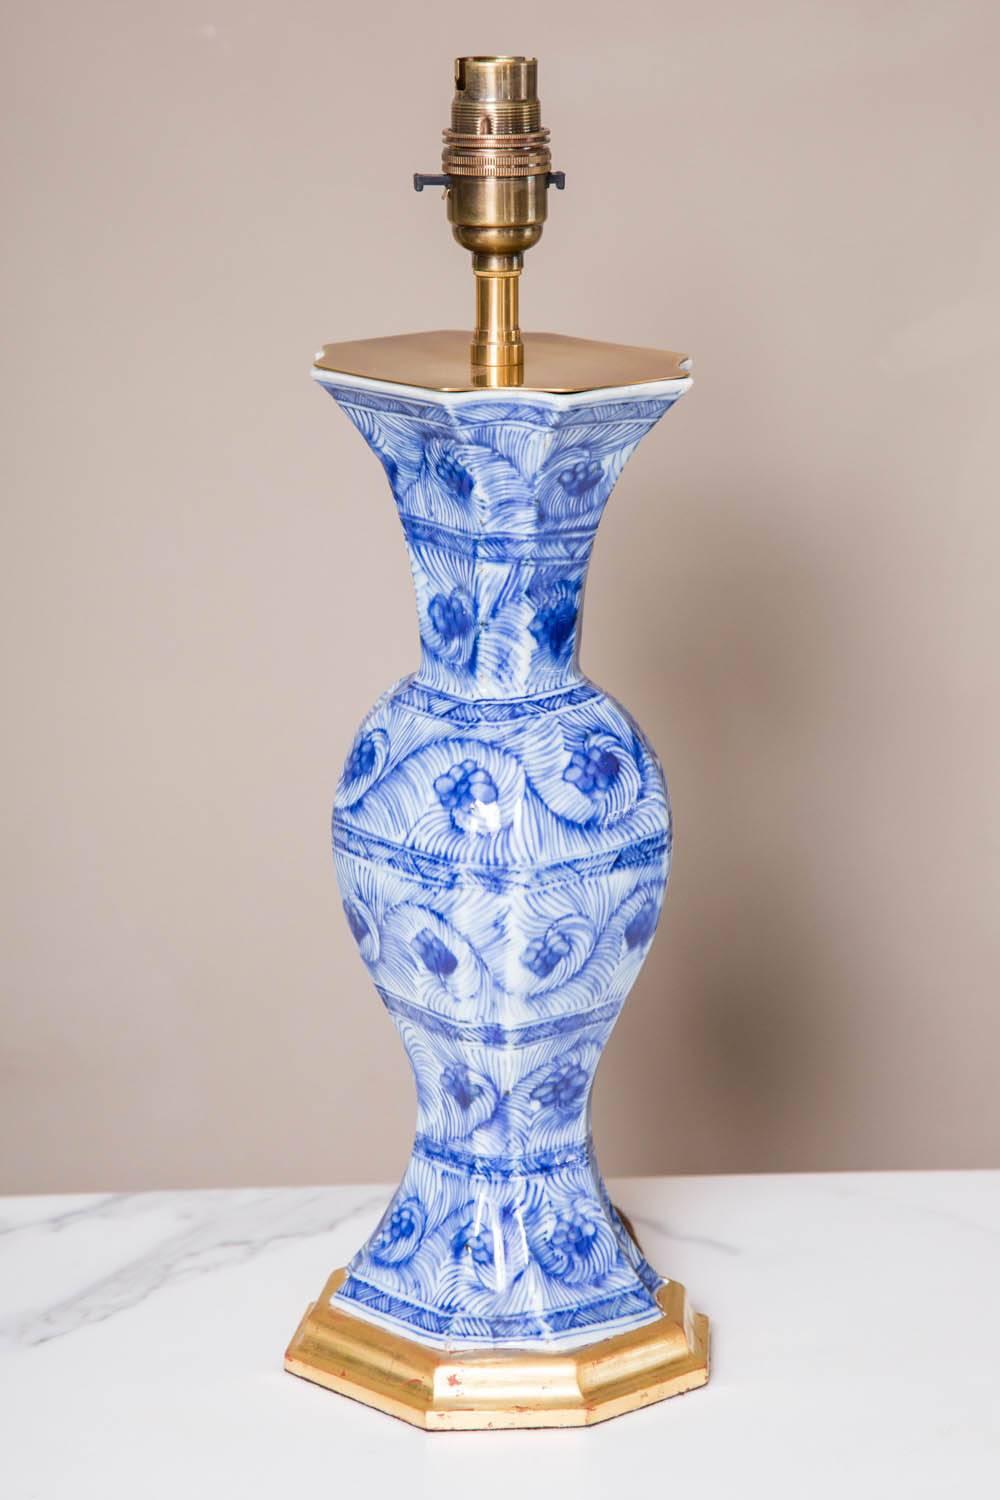 A pair of early 18th century Chinese blue and white vases mounted as lamps. The vases of tapering form and now mounted on hand-turned gilt wooden bases and fitted with antiqued brass caps. The size of these vases make perfect bedside or sofa table